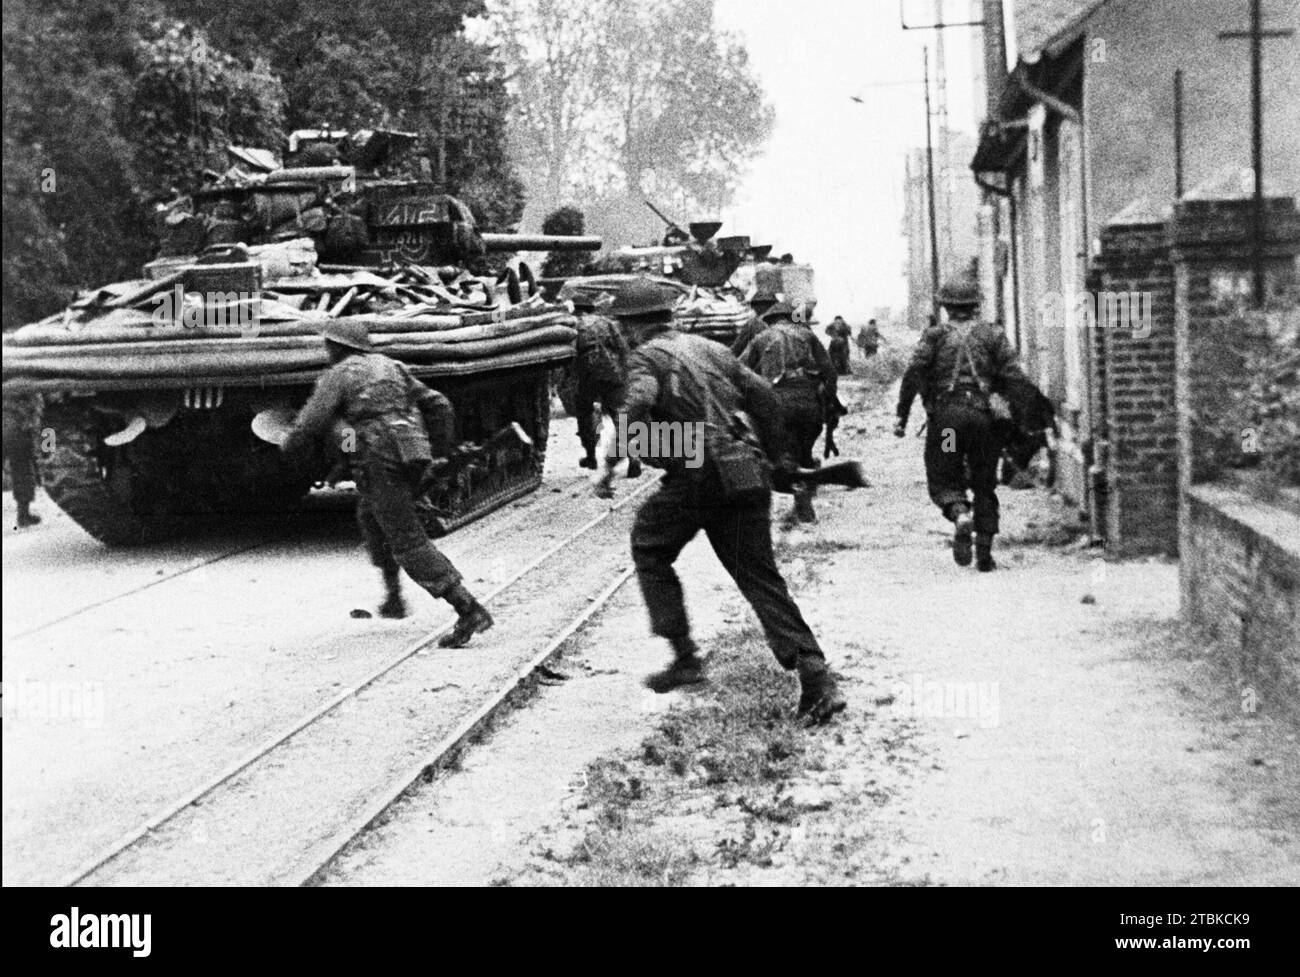 NORMANDY INVASION   Soldiers of No 4 Commando engage the enemy in Bella Riva, just east of Ouistreham, supported by duplex drive Sherman tanks of B Squadron 13/18th Royal Hussars. on 6 June 1944.  Photo: Sgt G Laws Stock Photo